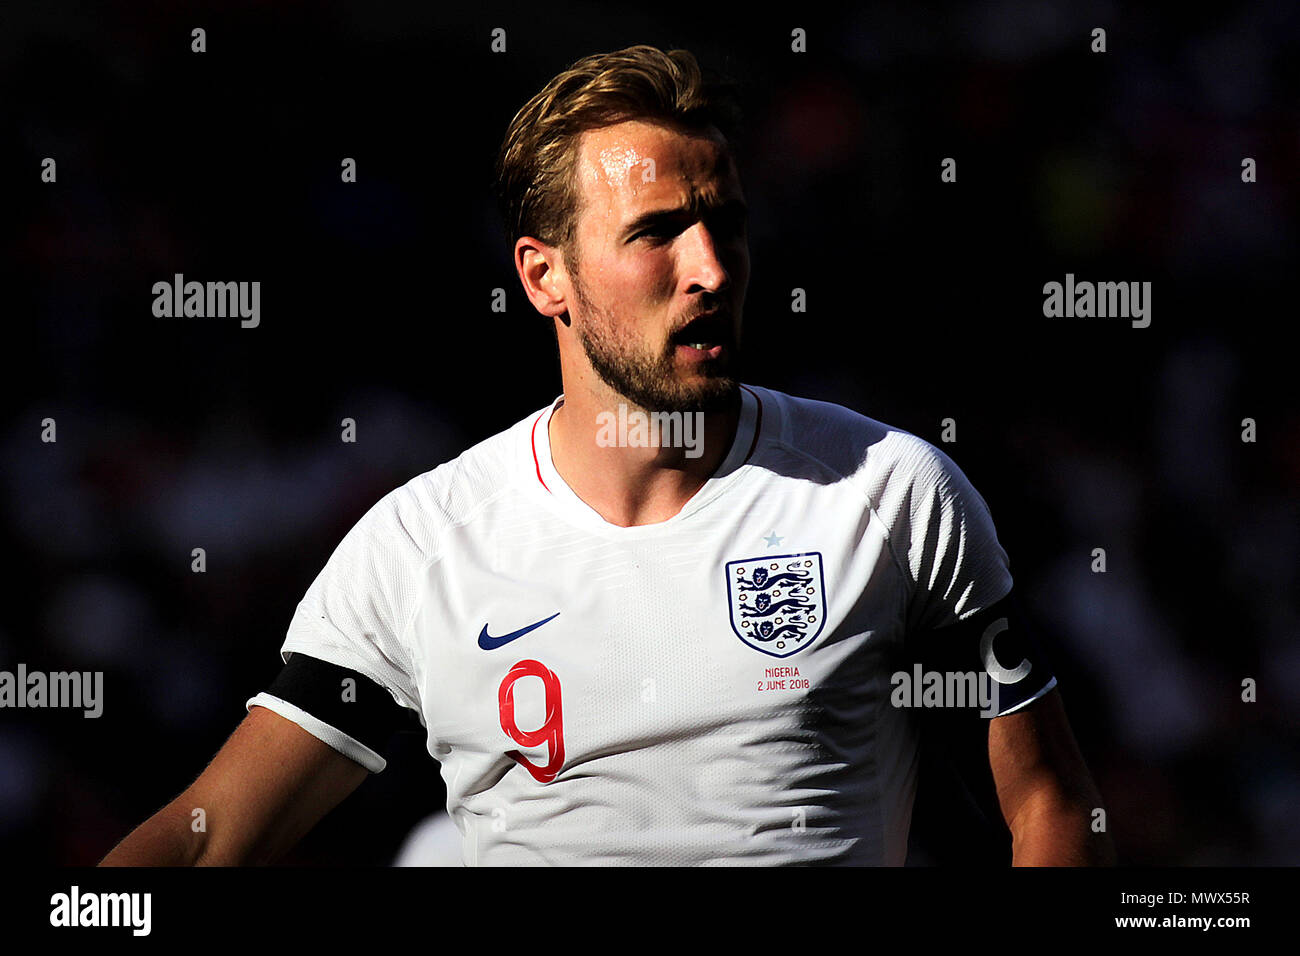 London, UK. 2nd June 2018. London, UK. 2nd June 2018.Harry Kane of England during the International Friendly match between England and Nigeria at Wembley Stadium on June 2nd 2018 in London, England. (Photo by Matt Bradshaw/phcimages.com) Credit: PHC Images/Alamy Live News Stock Photo